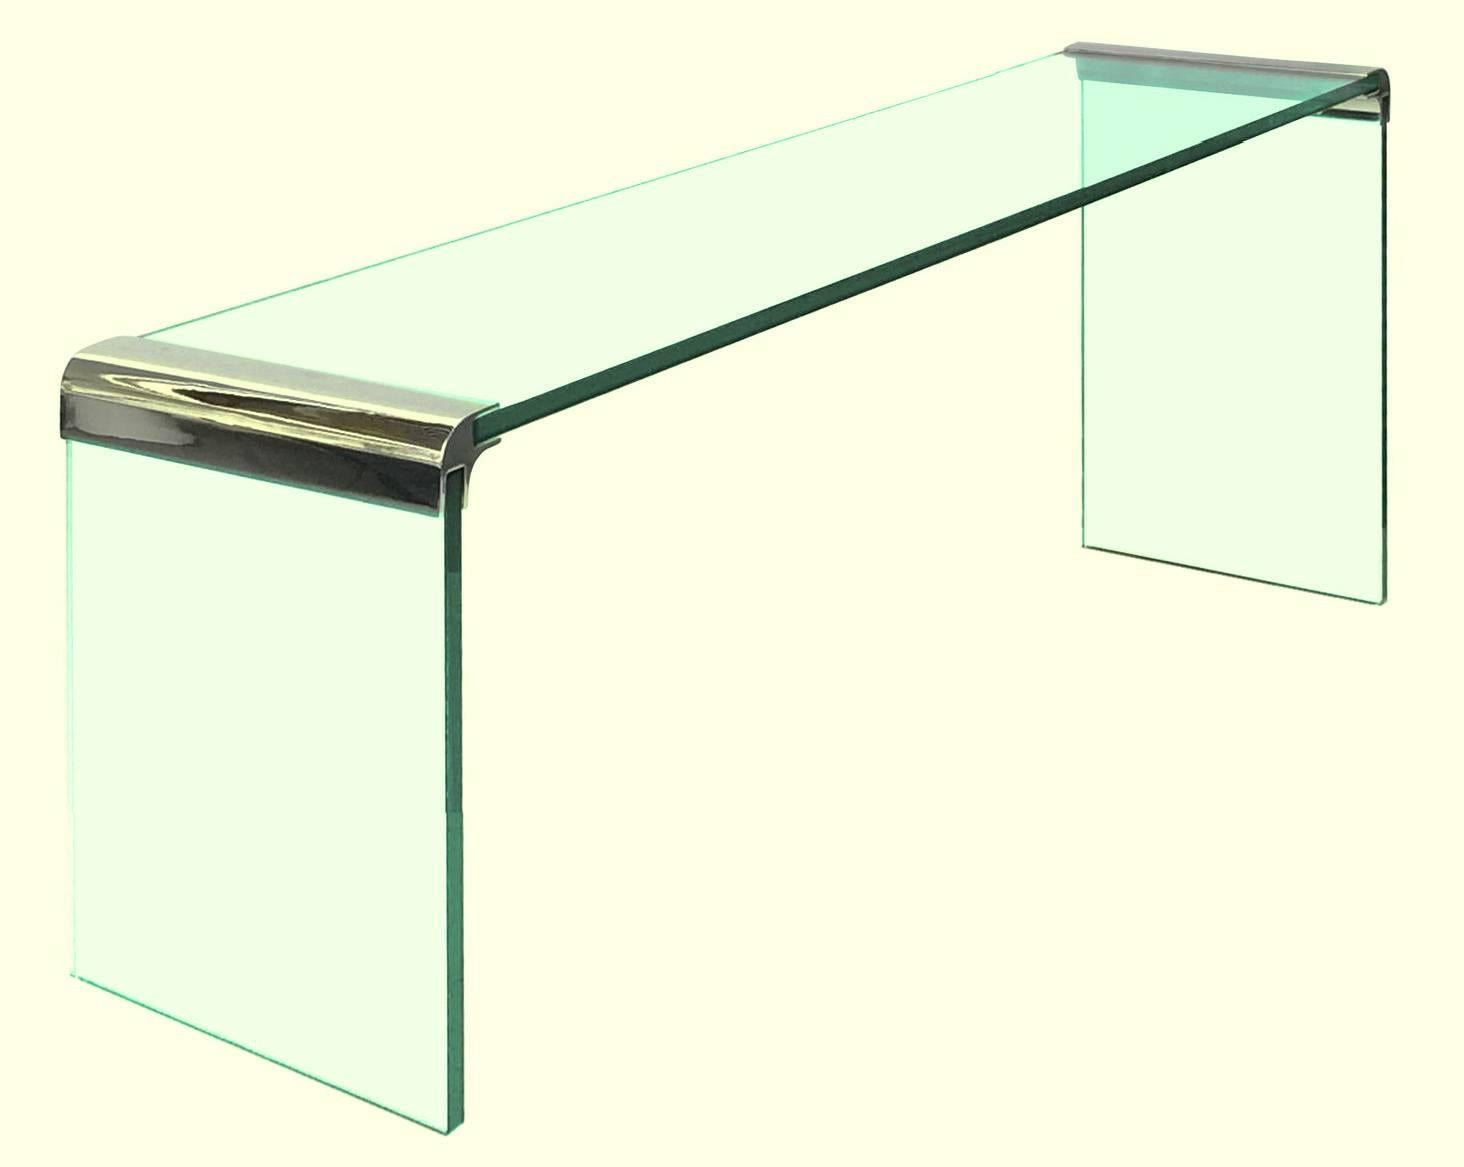 A selection of elegant waterfall console tables designed by Leon Rosen for The Pace Collection. Thick glass slabs connected by corners of solid nickel that are either polished to a mirror finish or gold-plated. Stunning.

These pieces disassemble